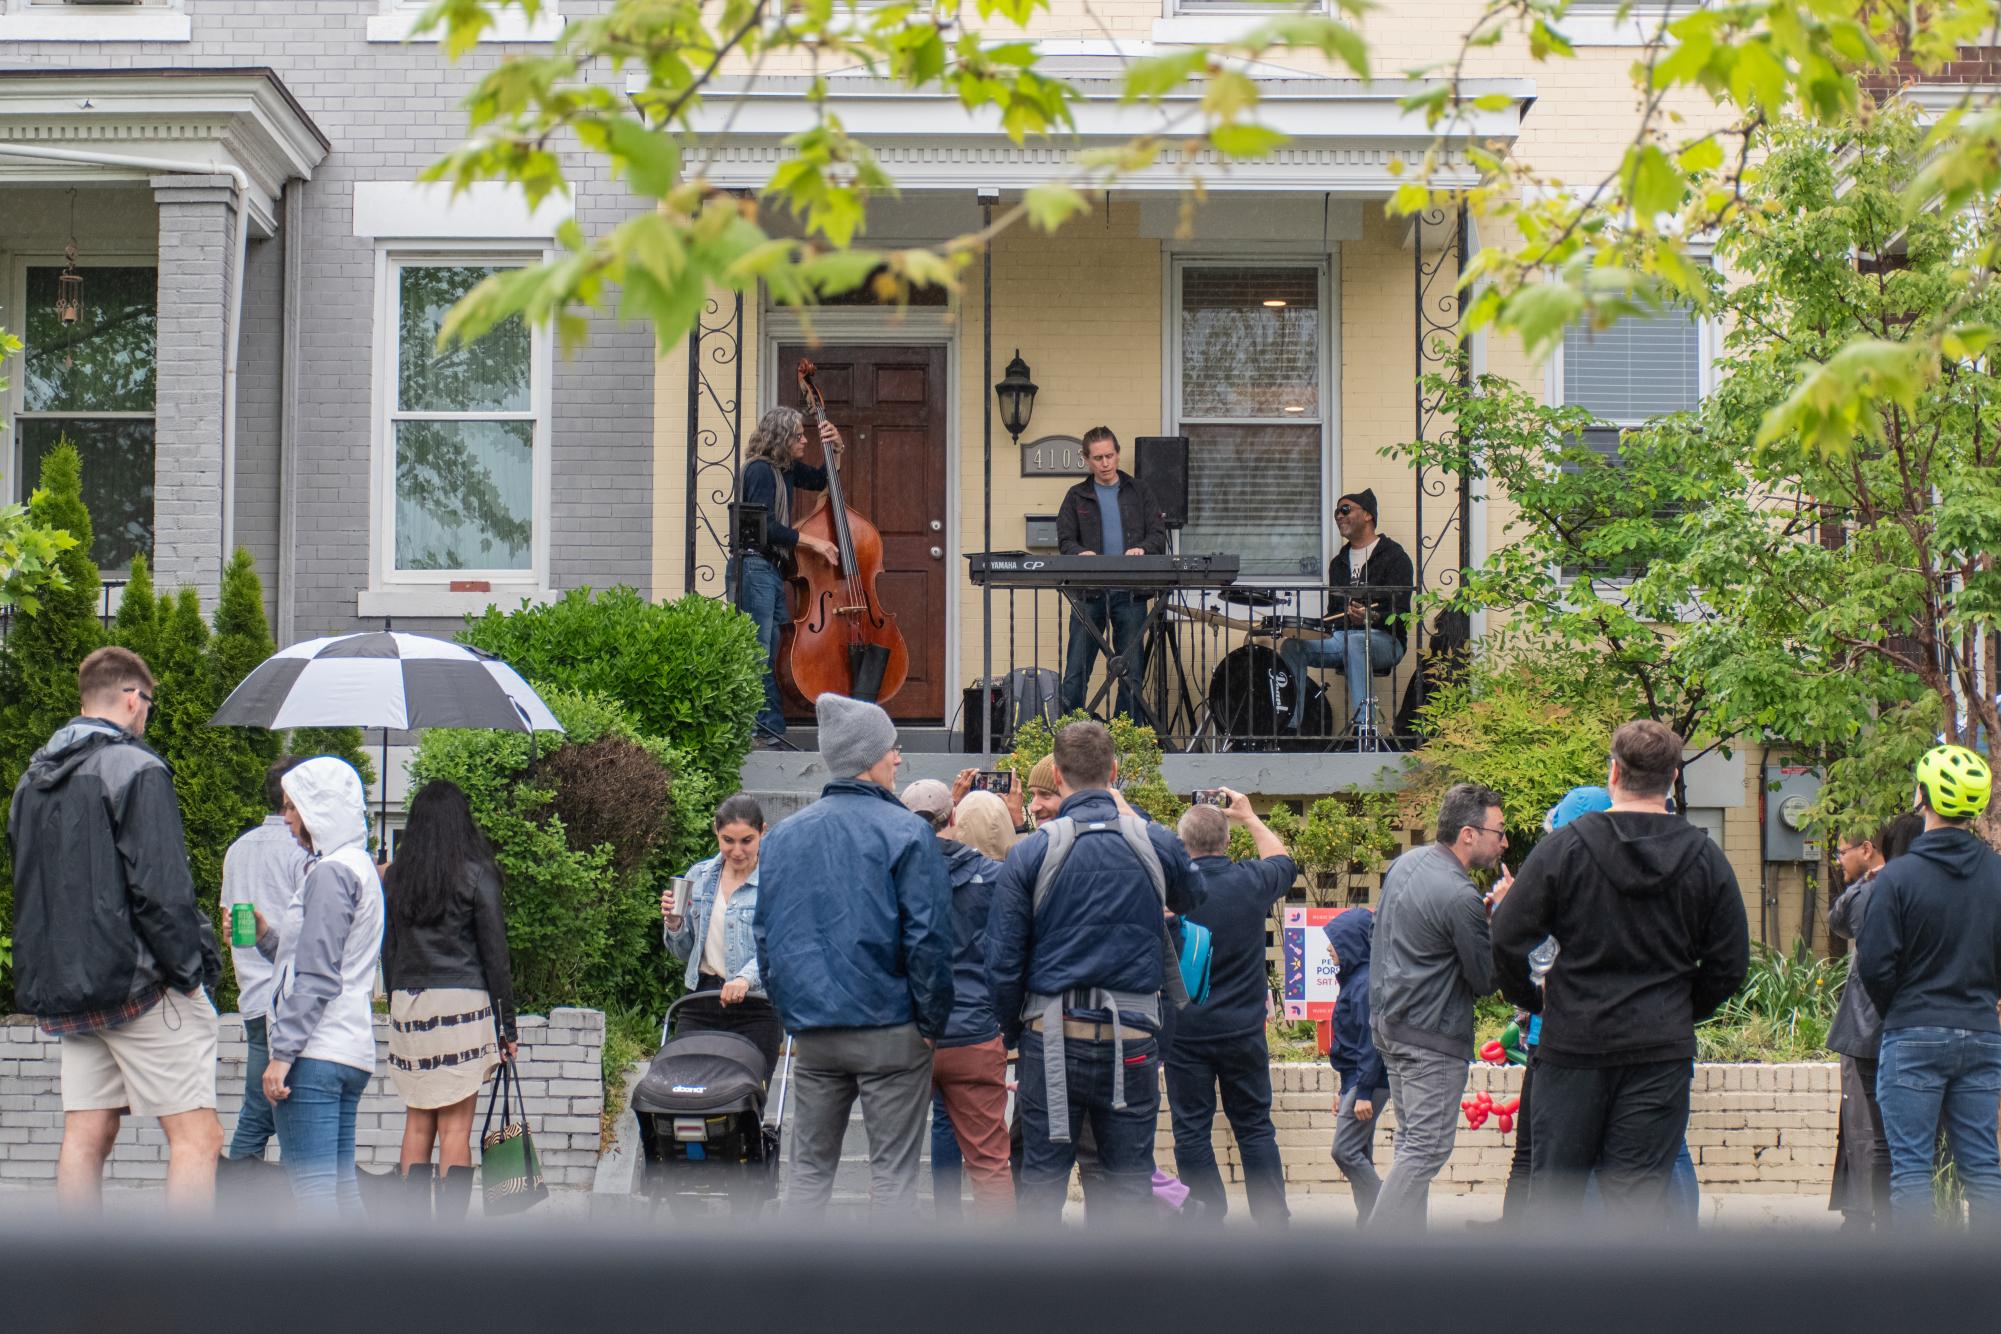 A crowd forms in front of the Jay Frost Trio, a local jazz ensemble.